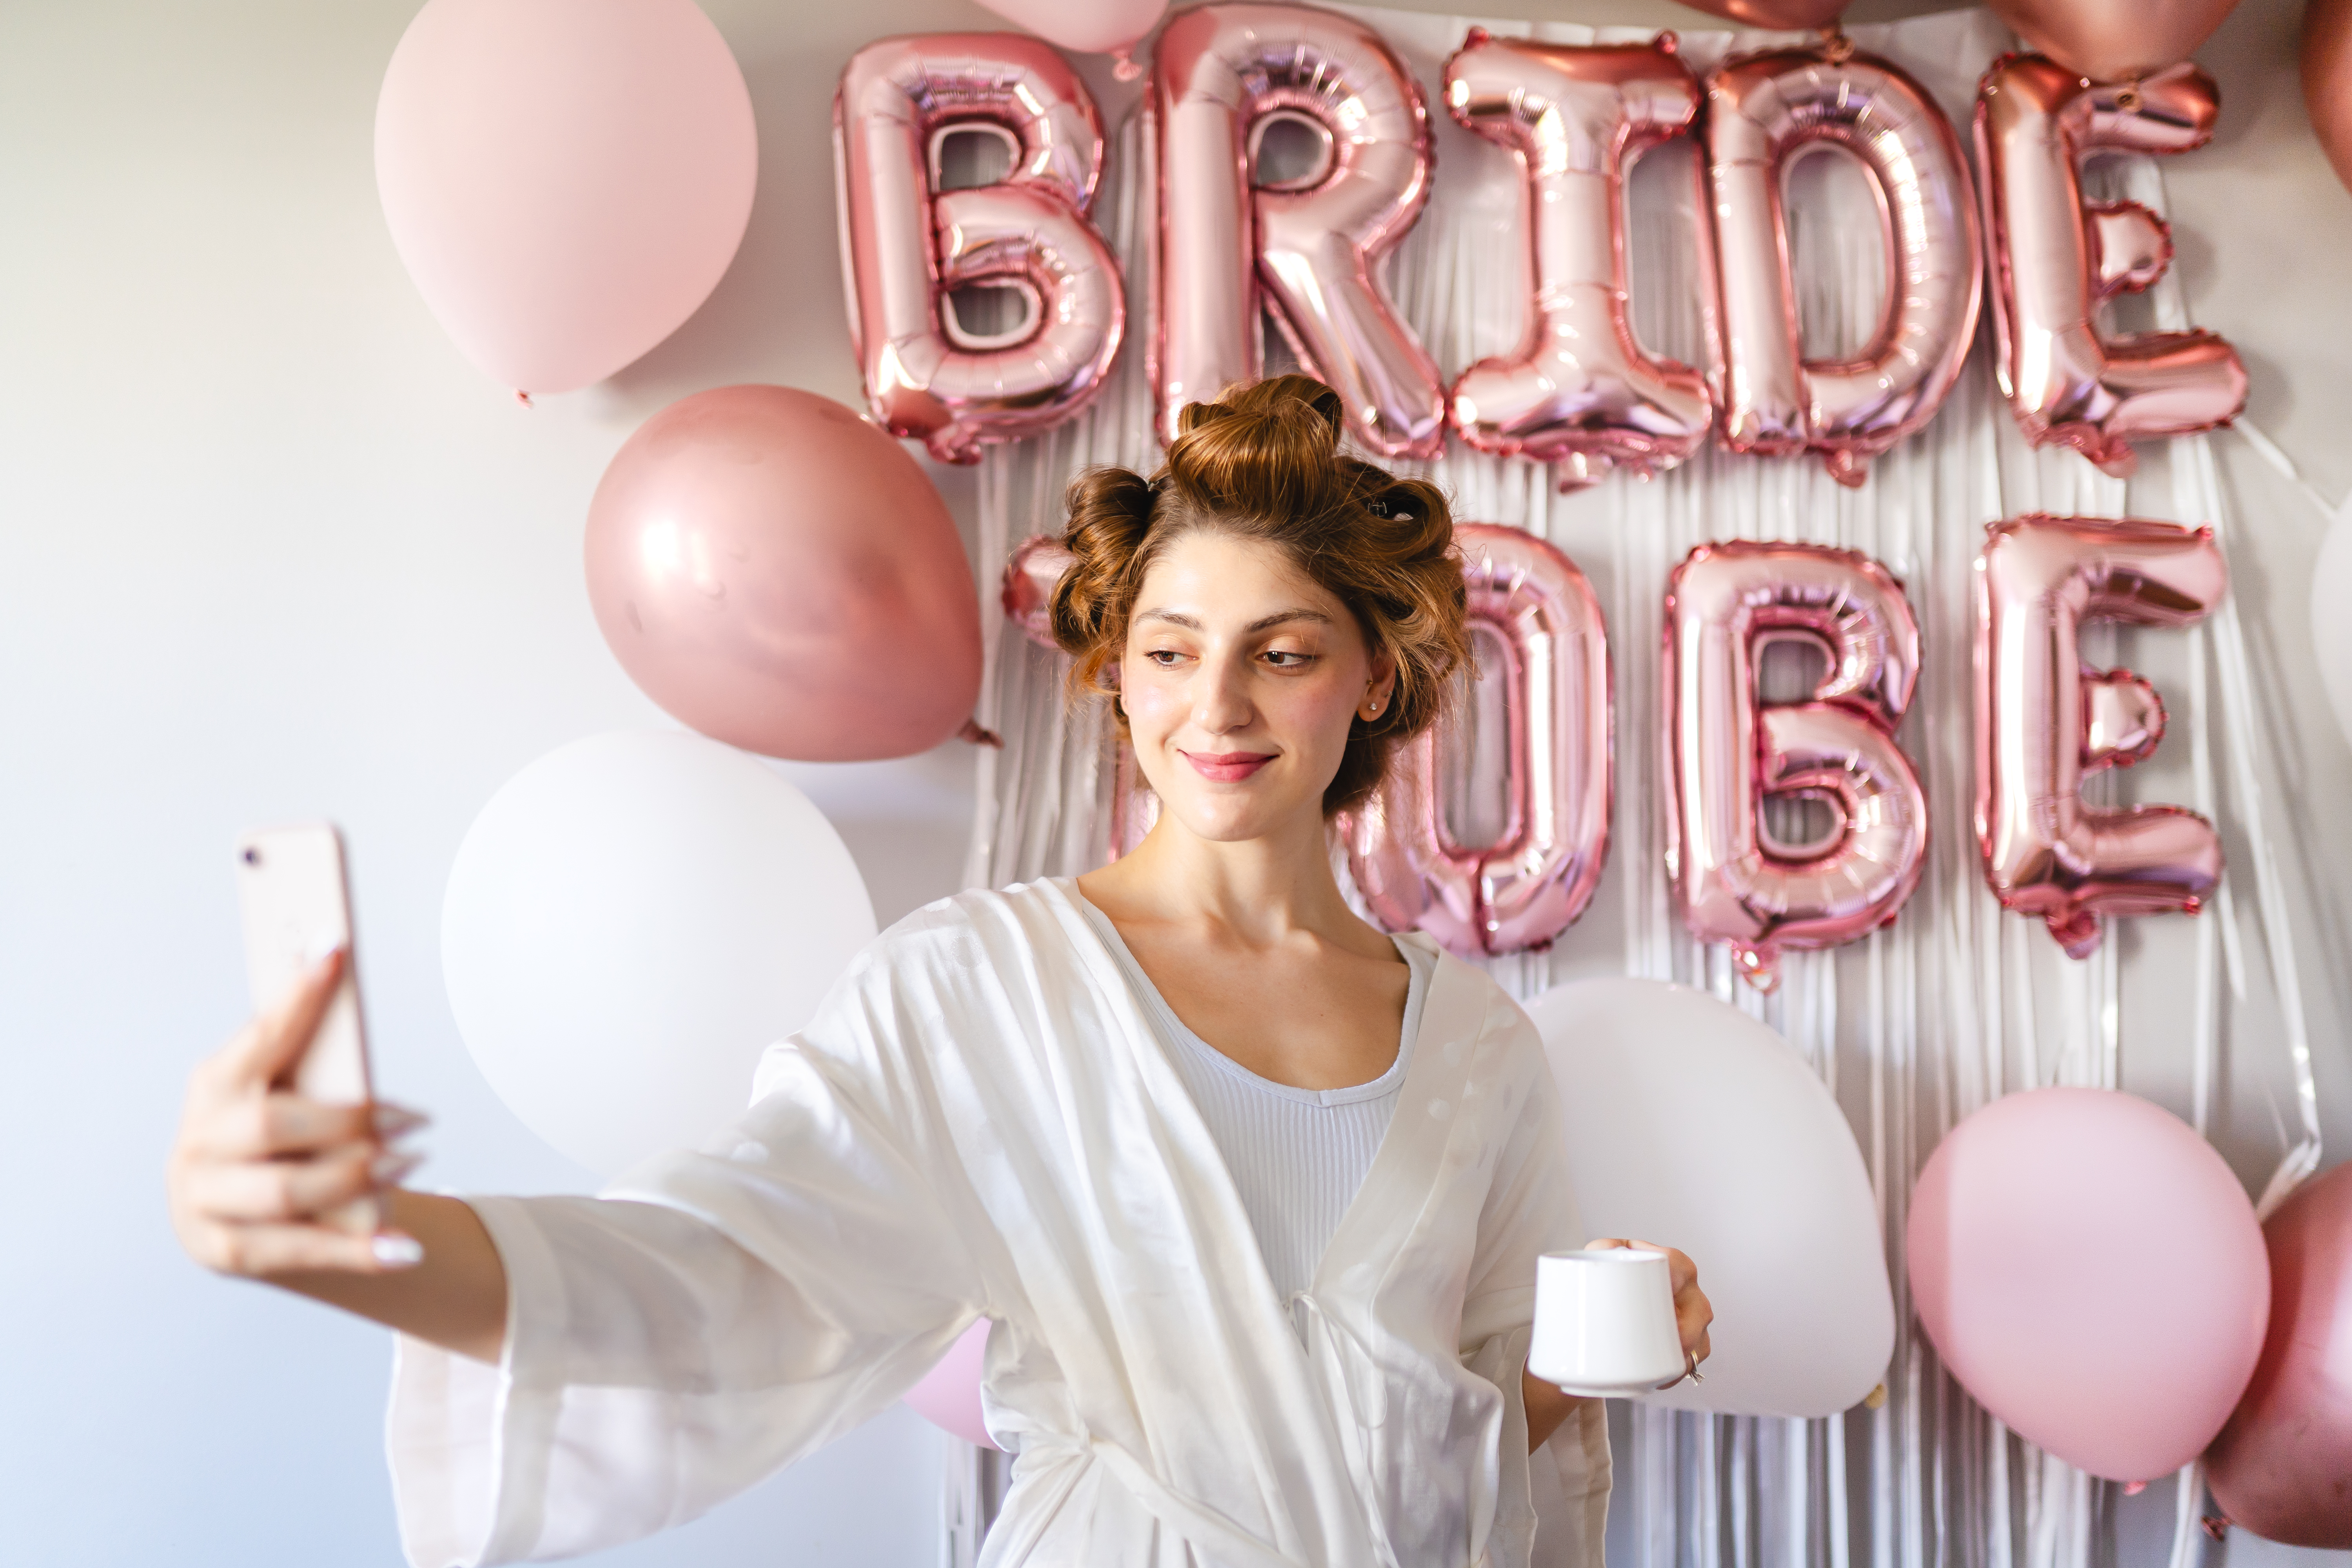 A bride-to-be | Source: Getty Images